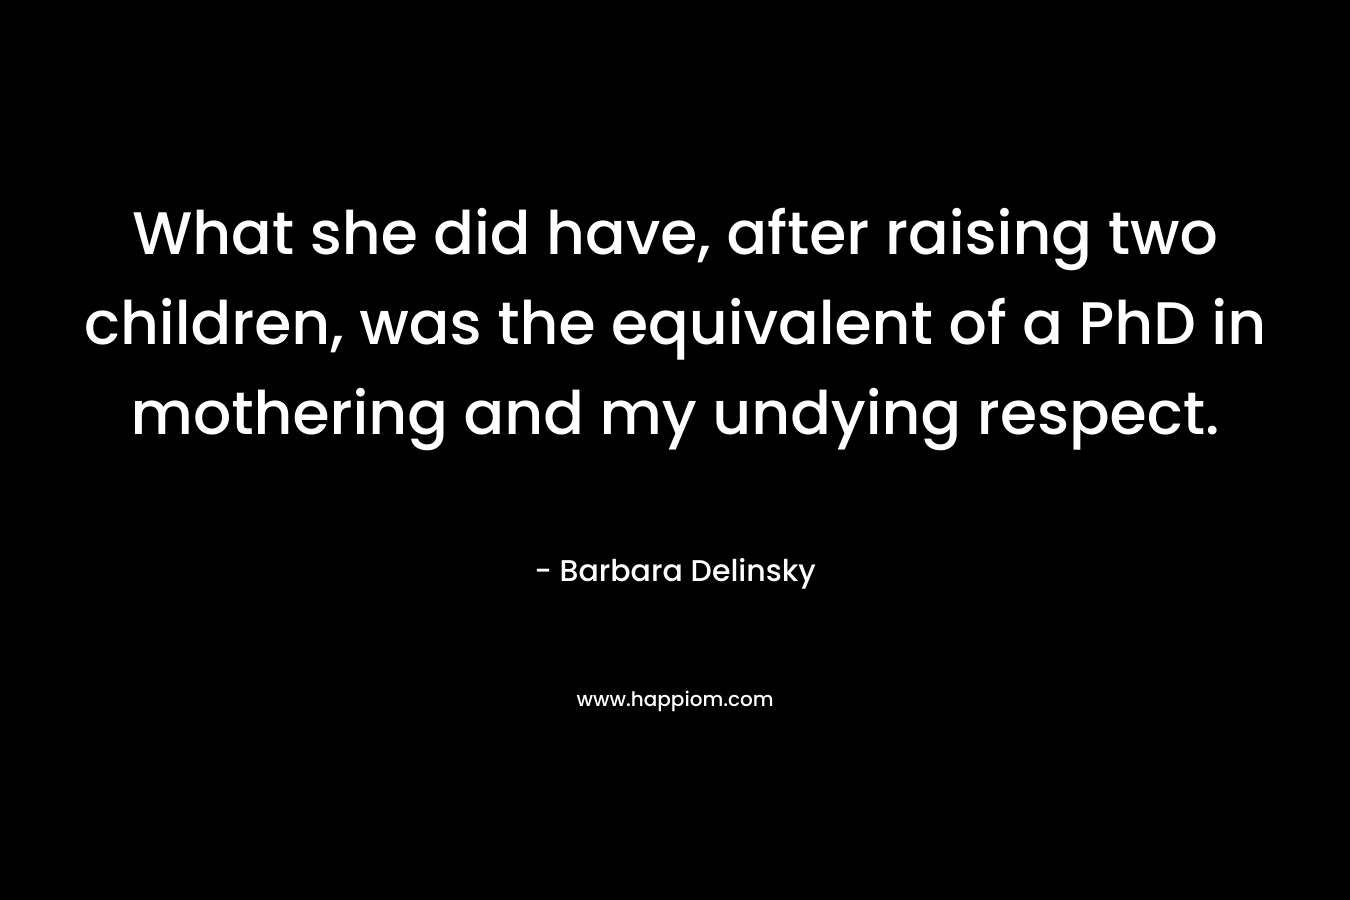 What she did have, after raising two children, was the equivalent of a PhD in mothering and my undying respect.